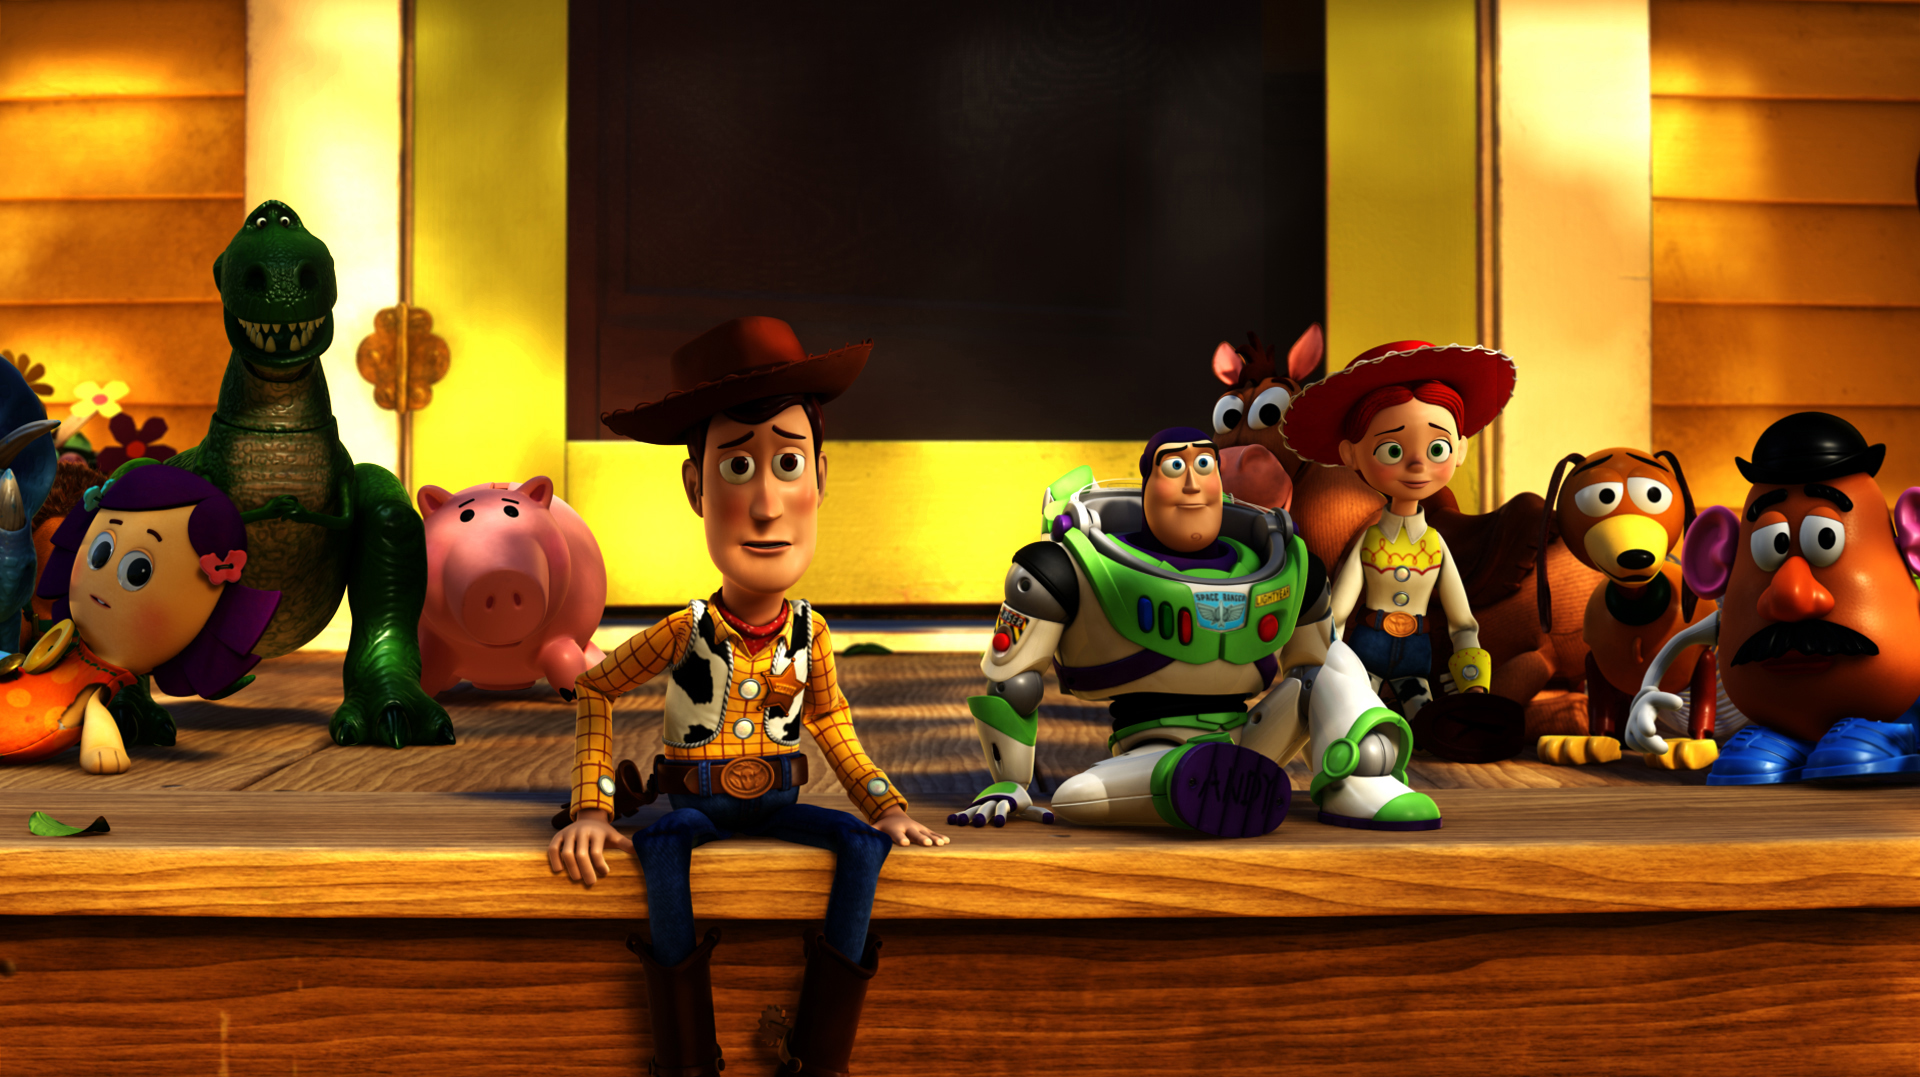 Toy Story 3 Full HD Image - Picturesio.info